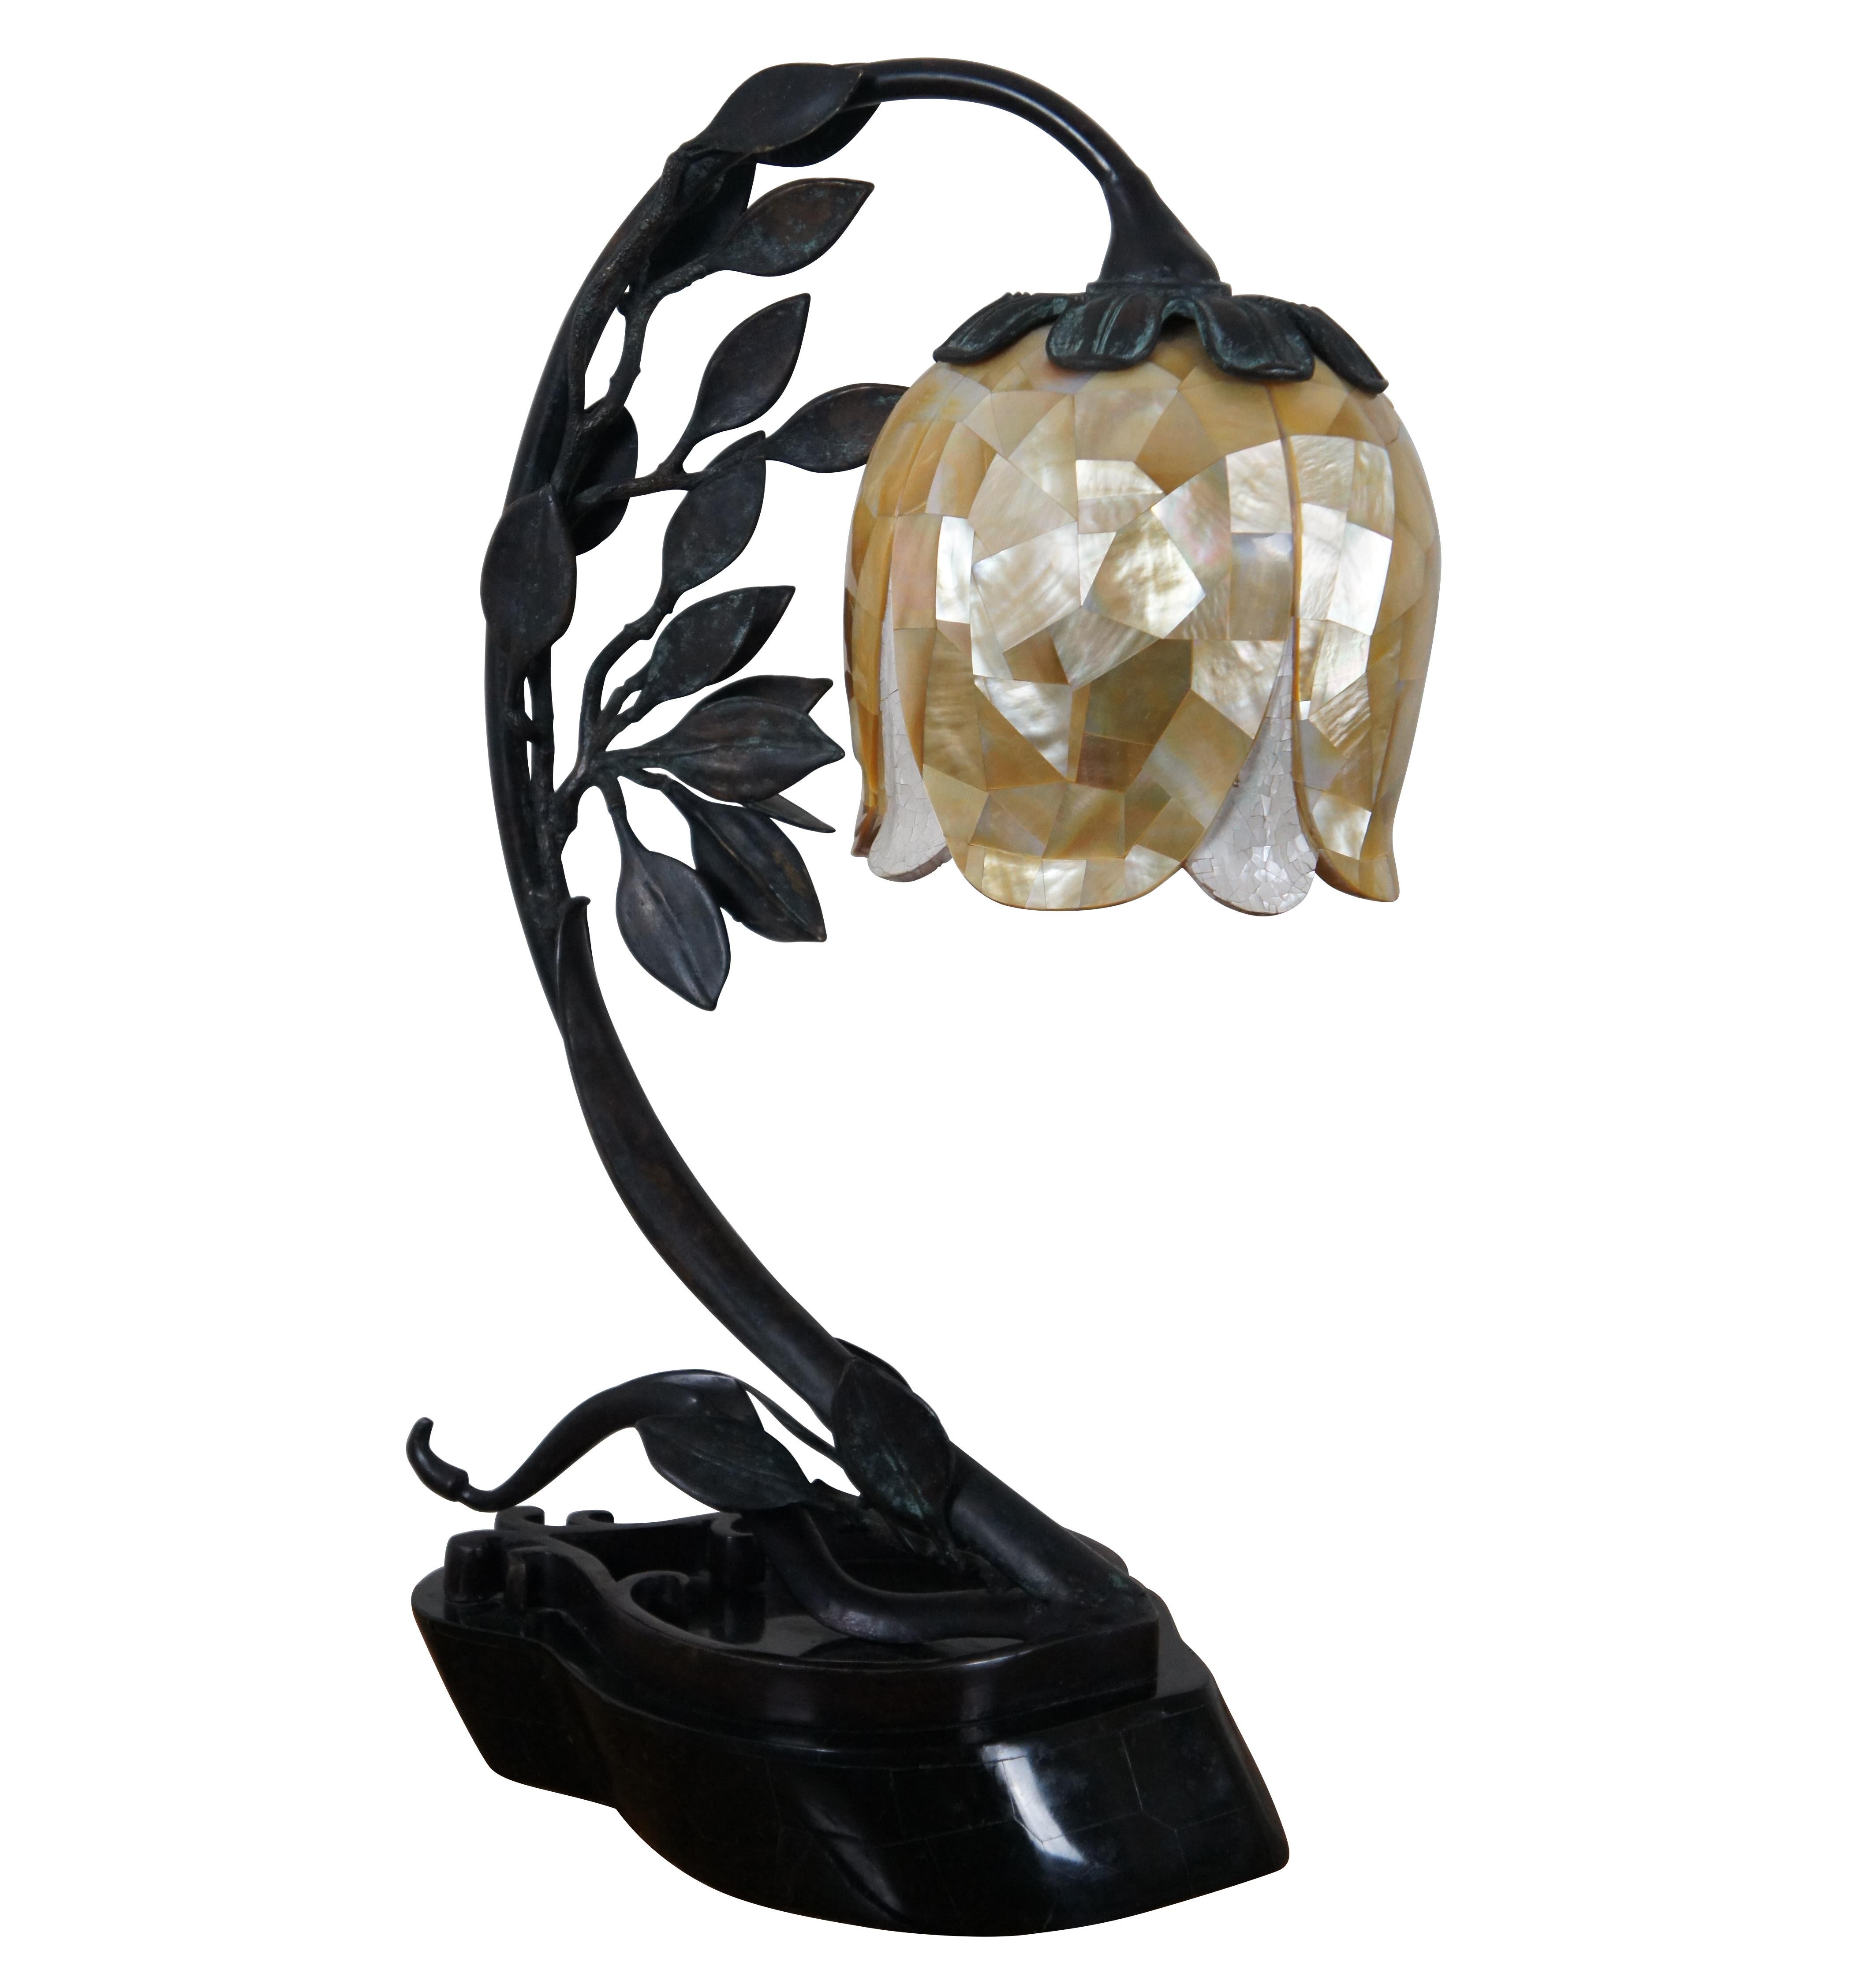 Vintage Maitland Smith Art Deco style table lamp featuring a teardrop shaped, tessellated black marble base supporting a curving bronze stem of a tulip shaped flower in tessellated resin / mother of pearl.